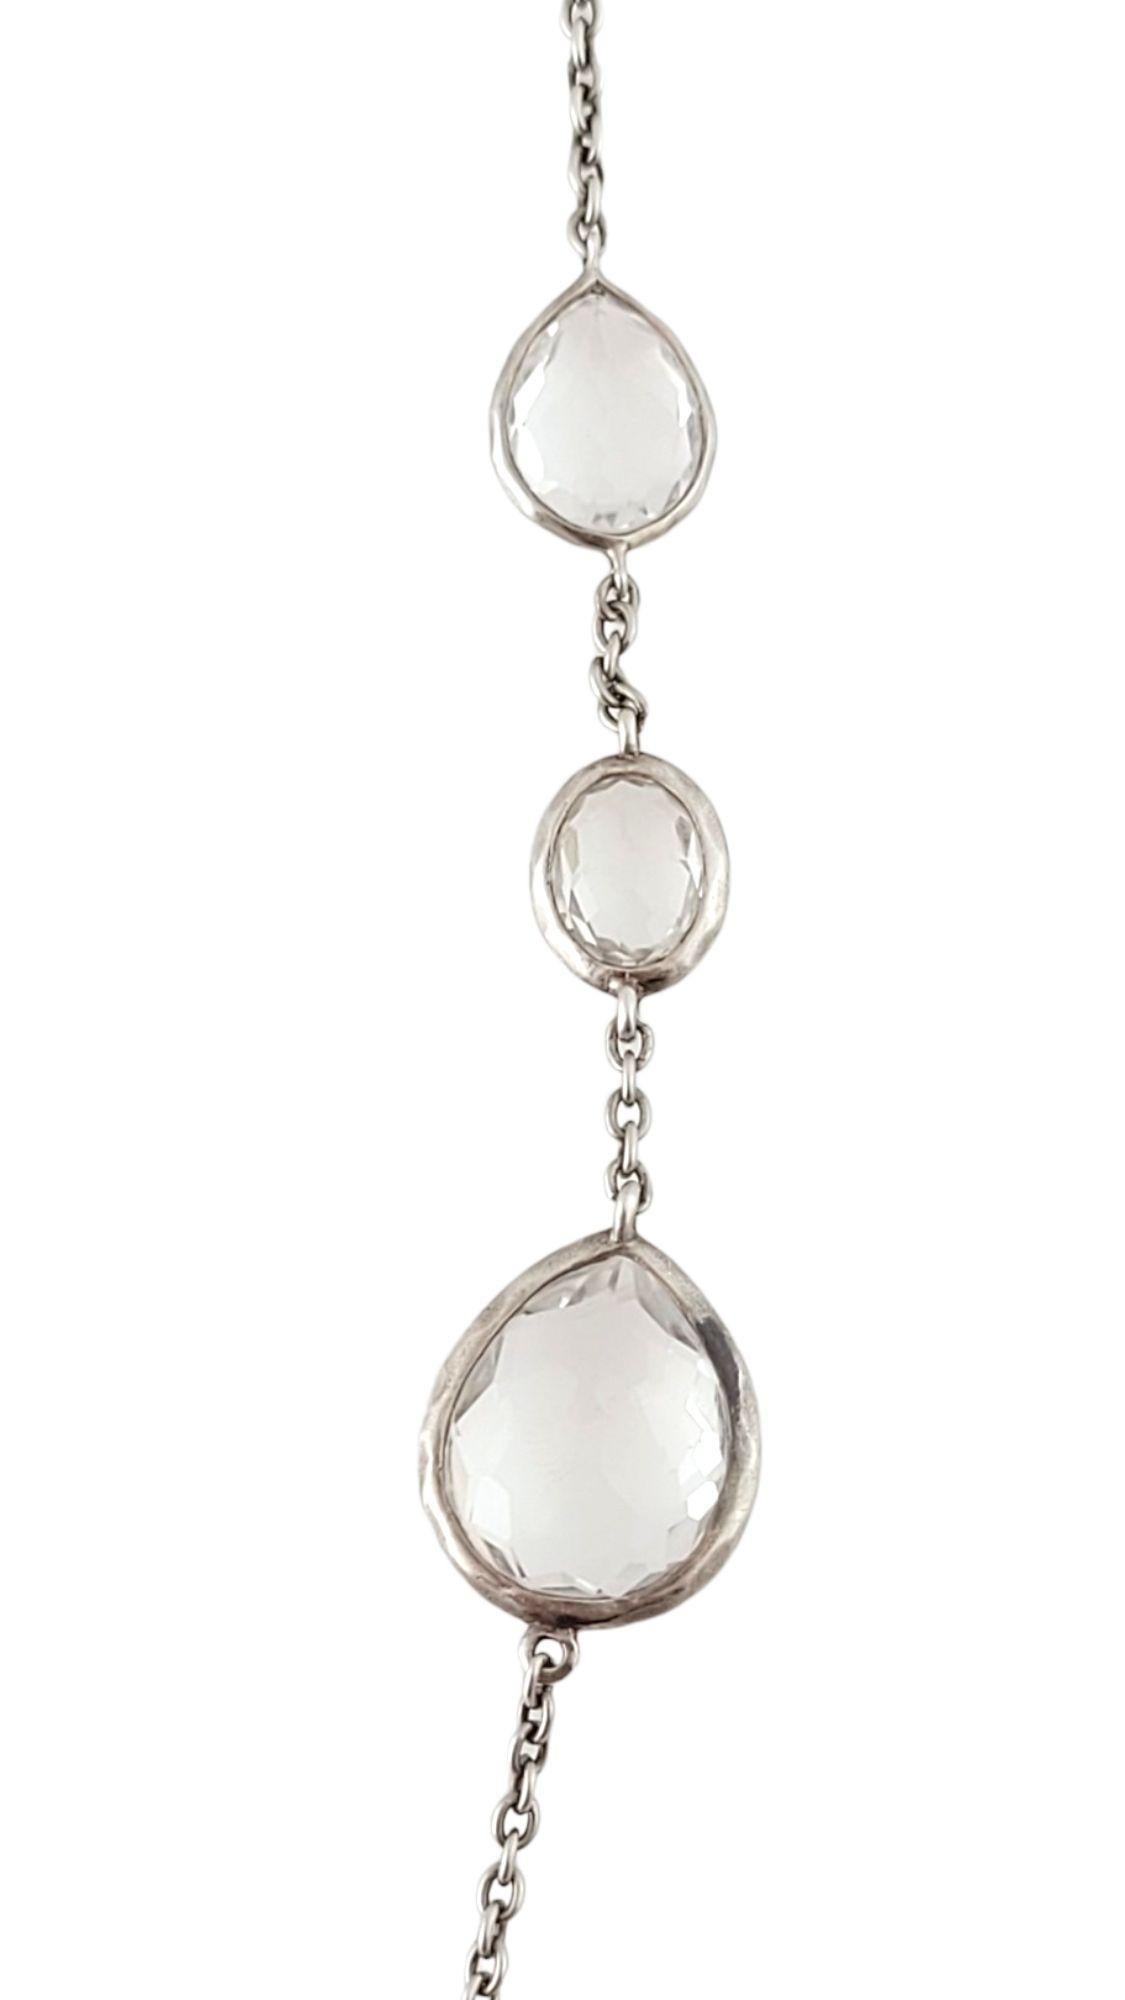 Oval Cut Ippolita 925 Sterling Silver Rock Candy Necklace #15049